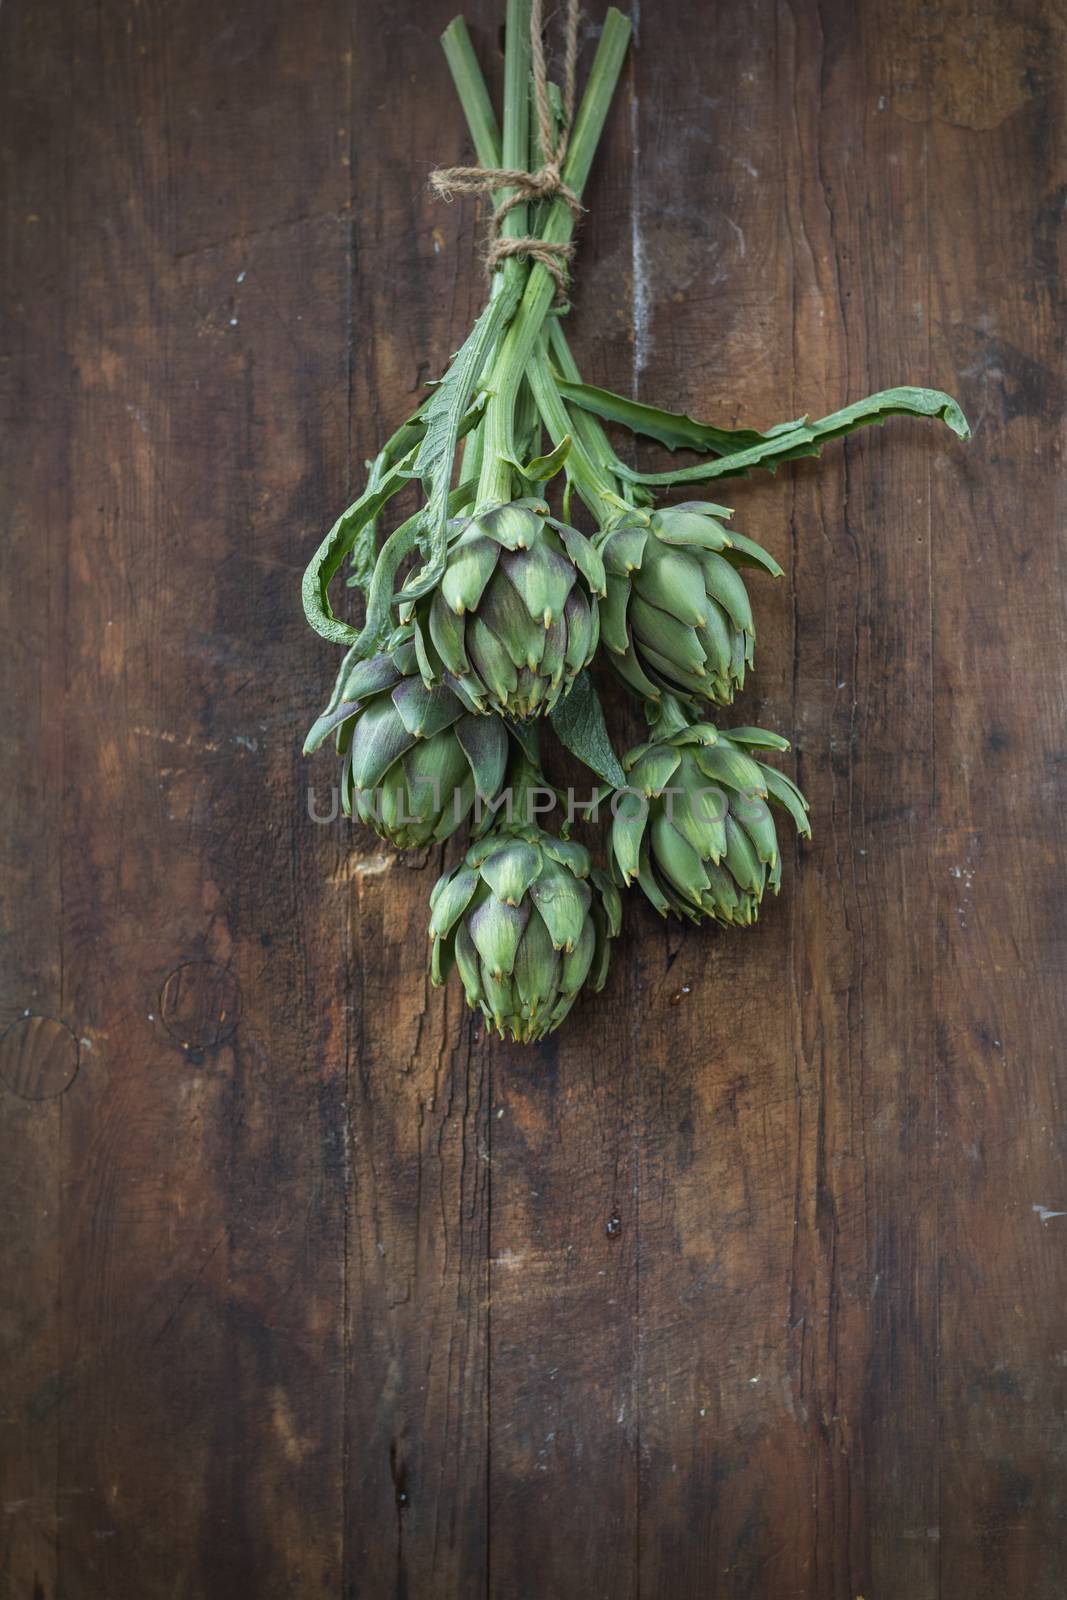 Supplies and materials for artichoke bouquet on wooden background.